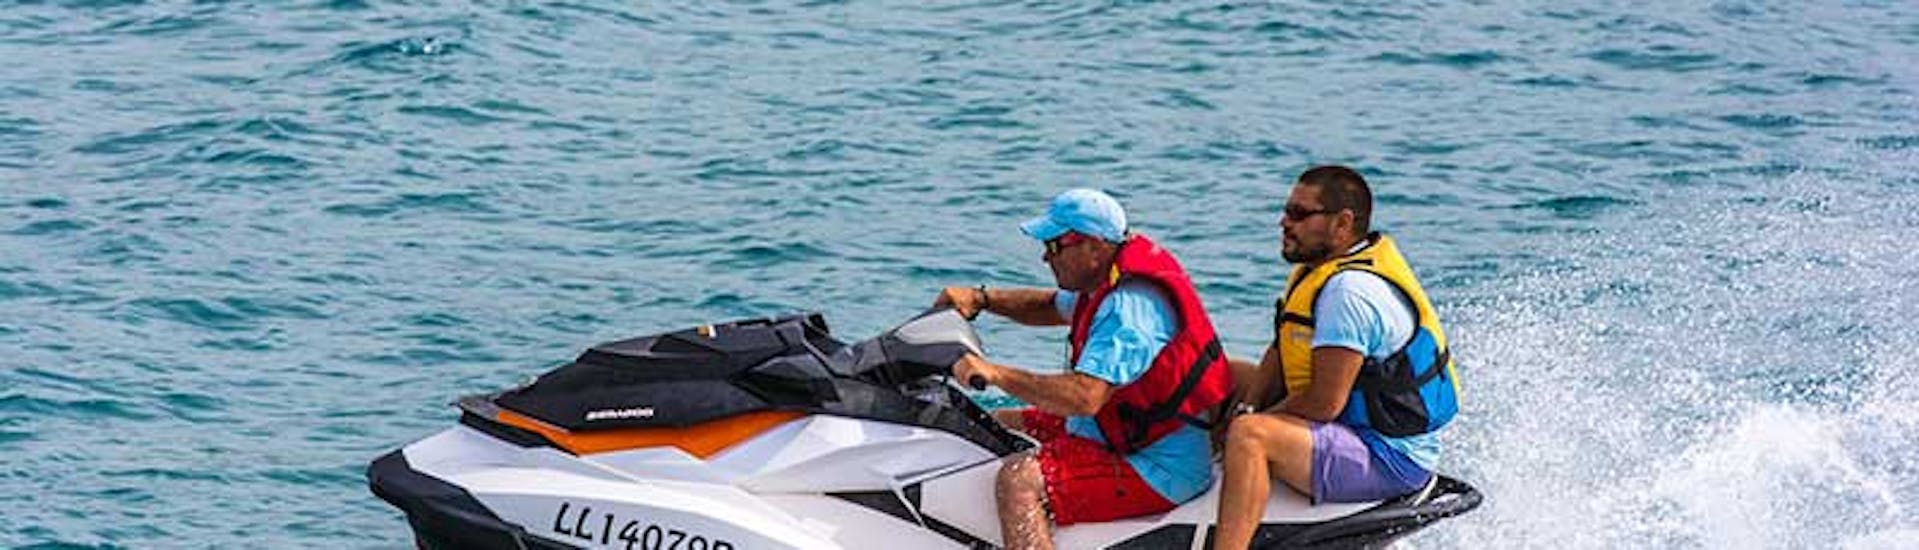 A fun Jet Ski ride takes place in Anassa Beach in Cyprus from Latchi Dive & Watersports Centre.